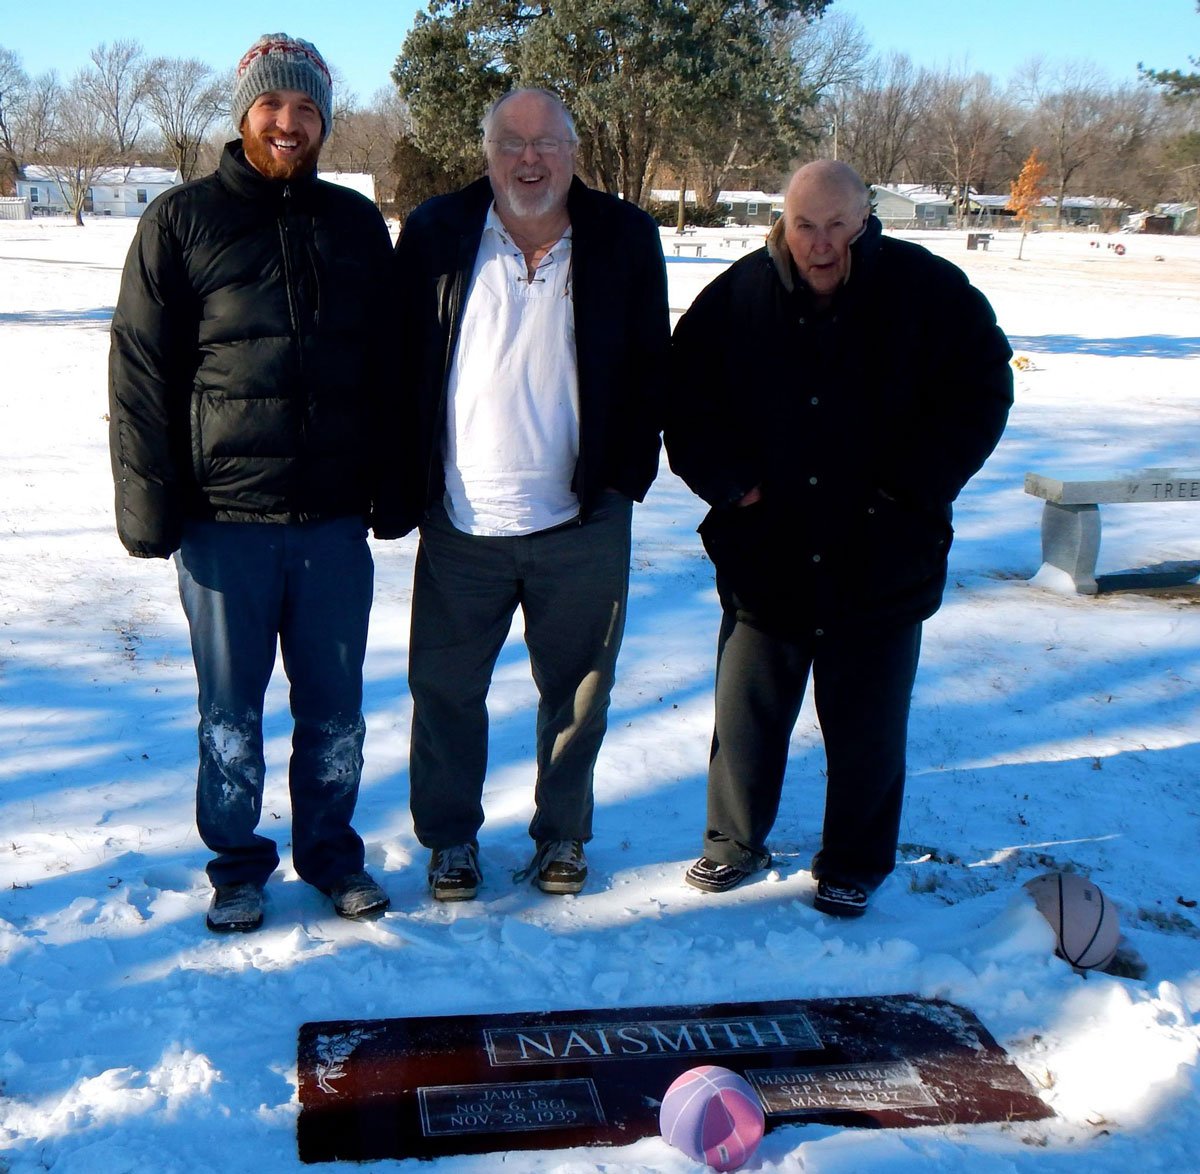 Danny sondreal curtis j phillips and george phillips at the grave of dr james naismith in lawrence kansas